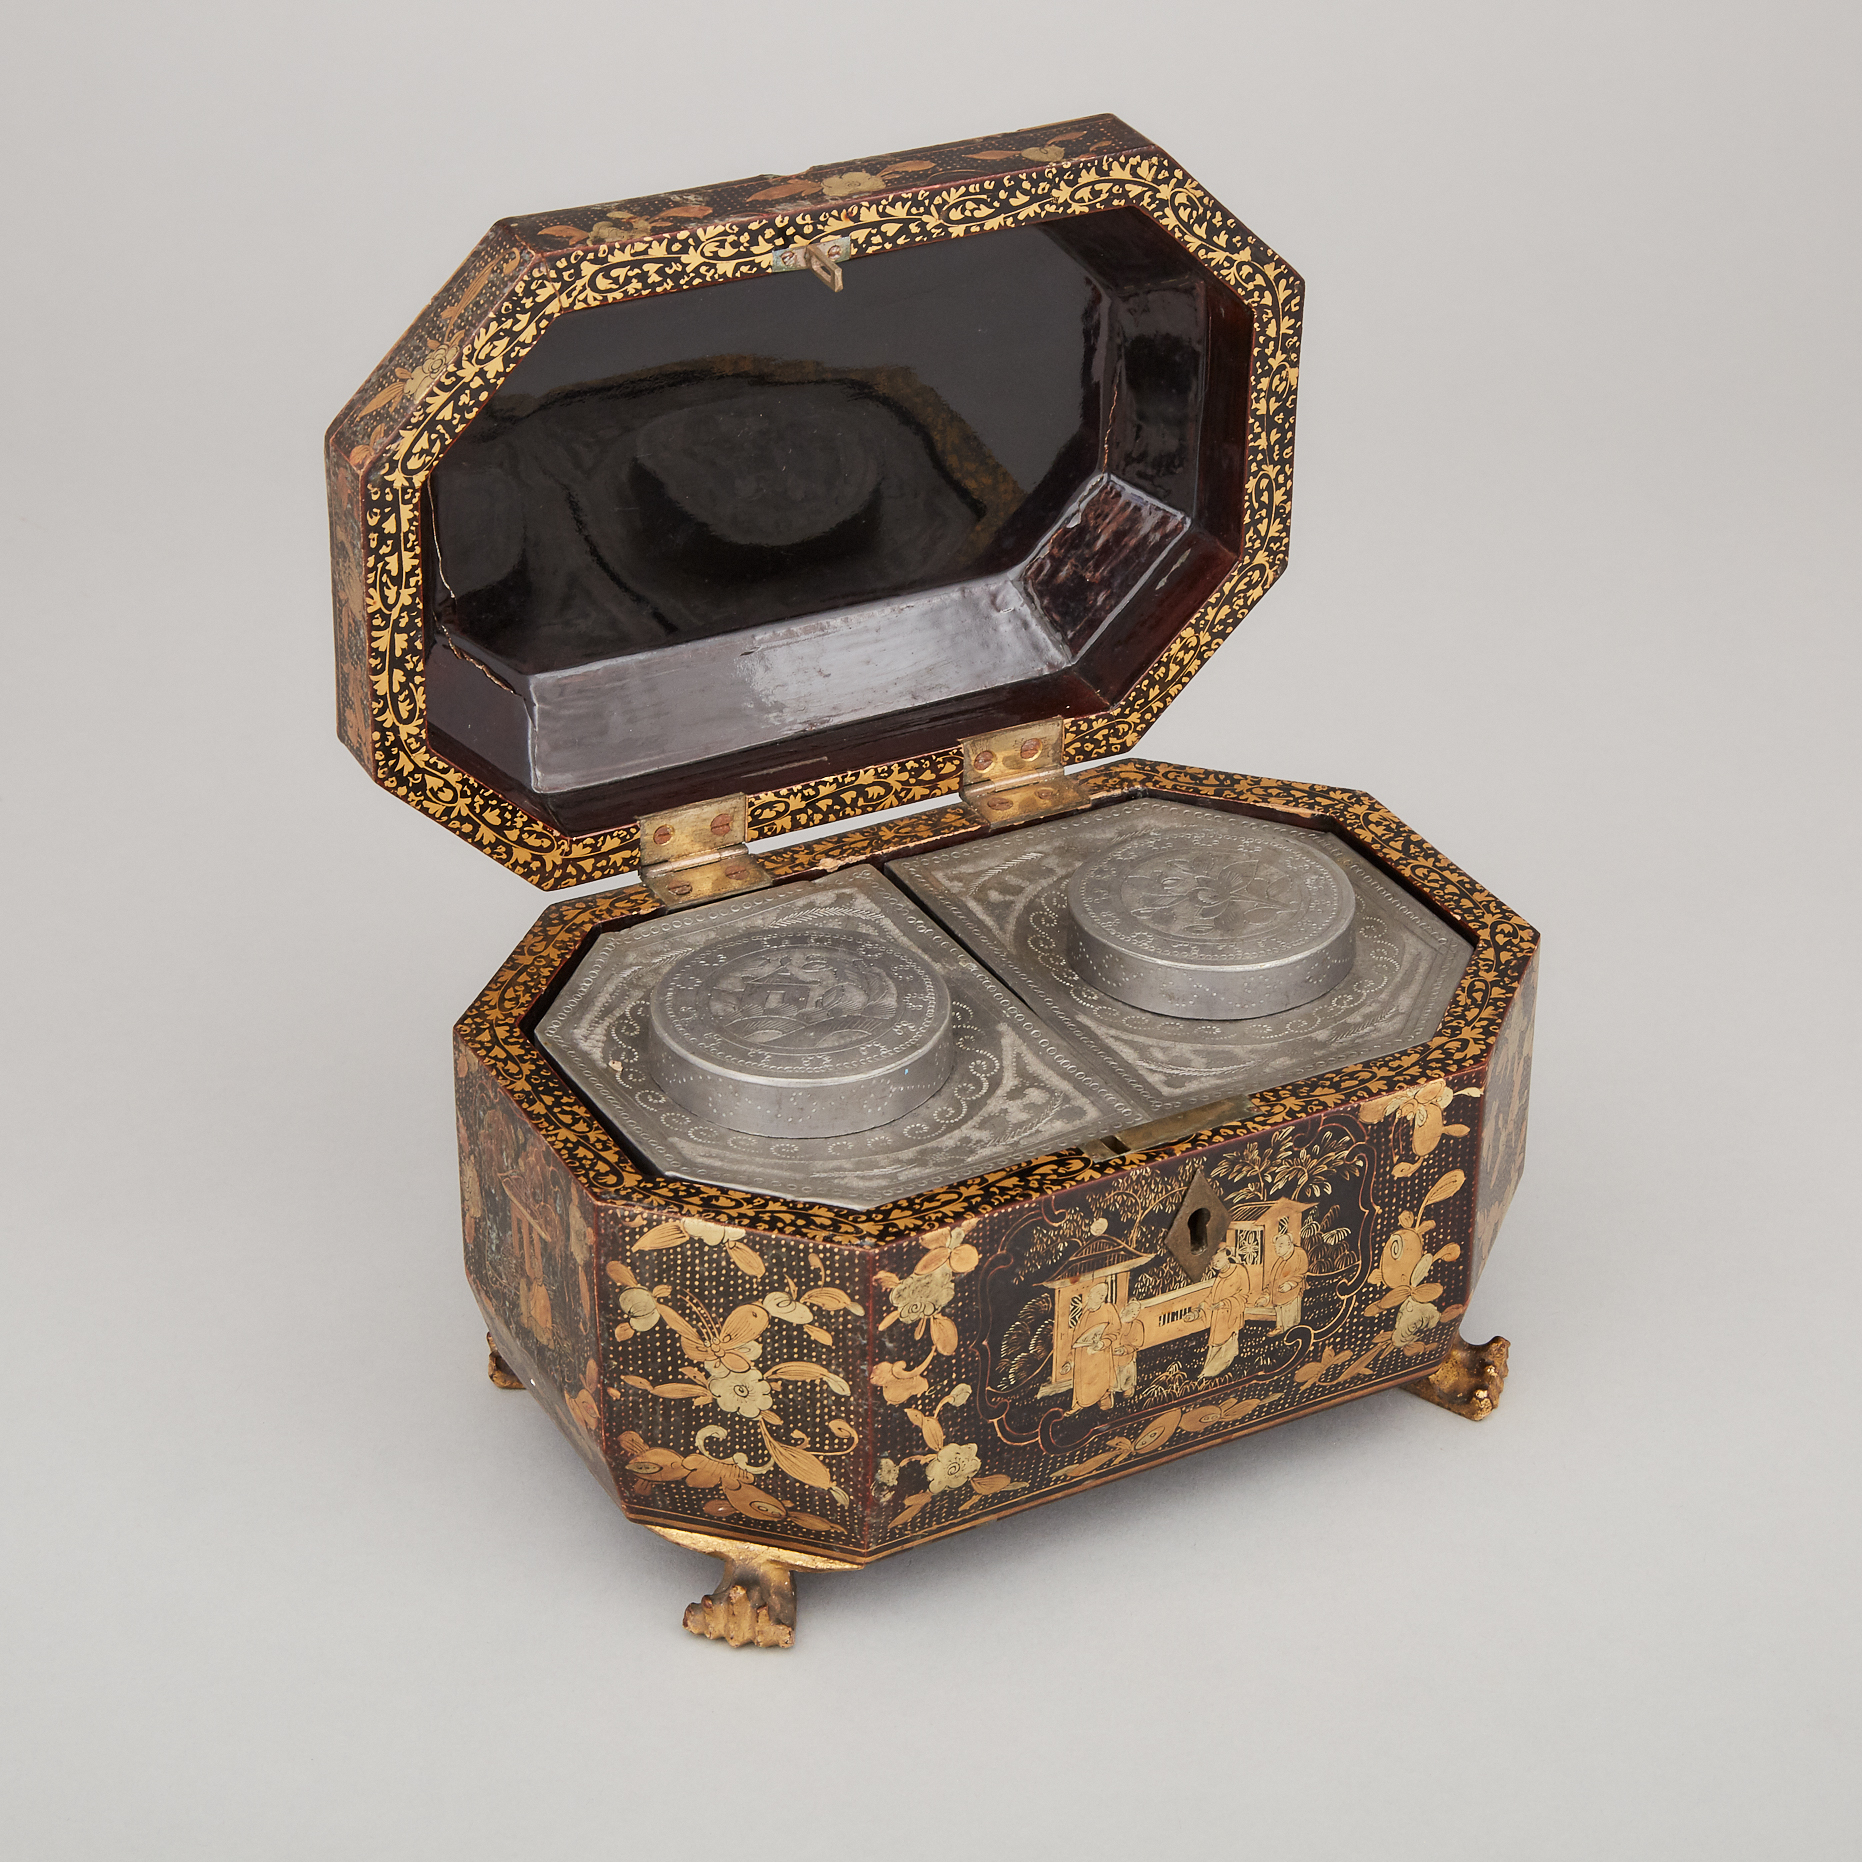 A Chinese Export Black Lacquer Tea Caddy, 19th Century